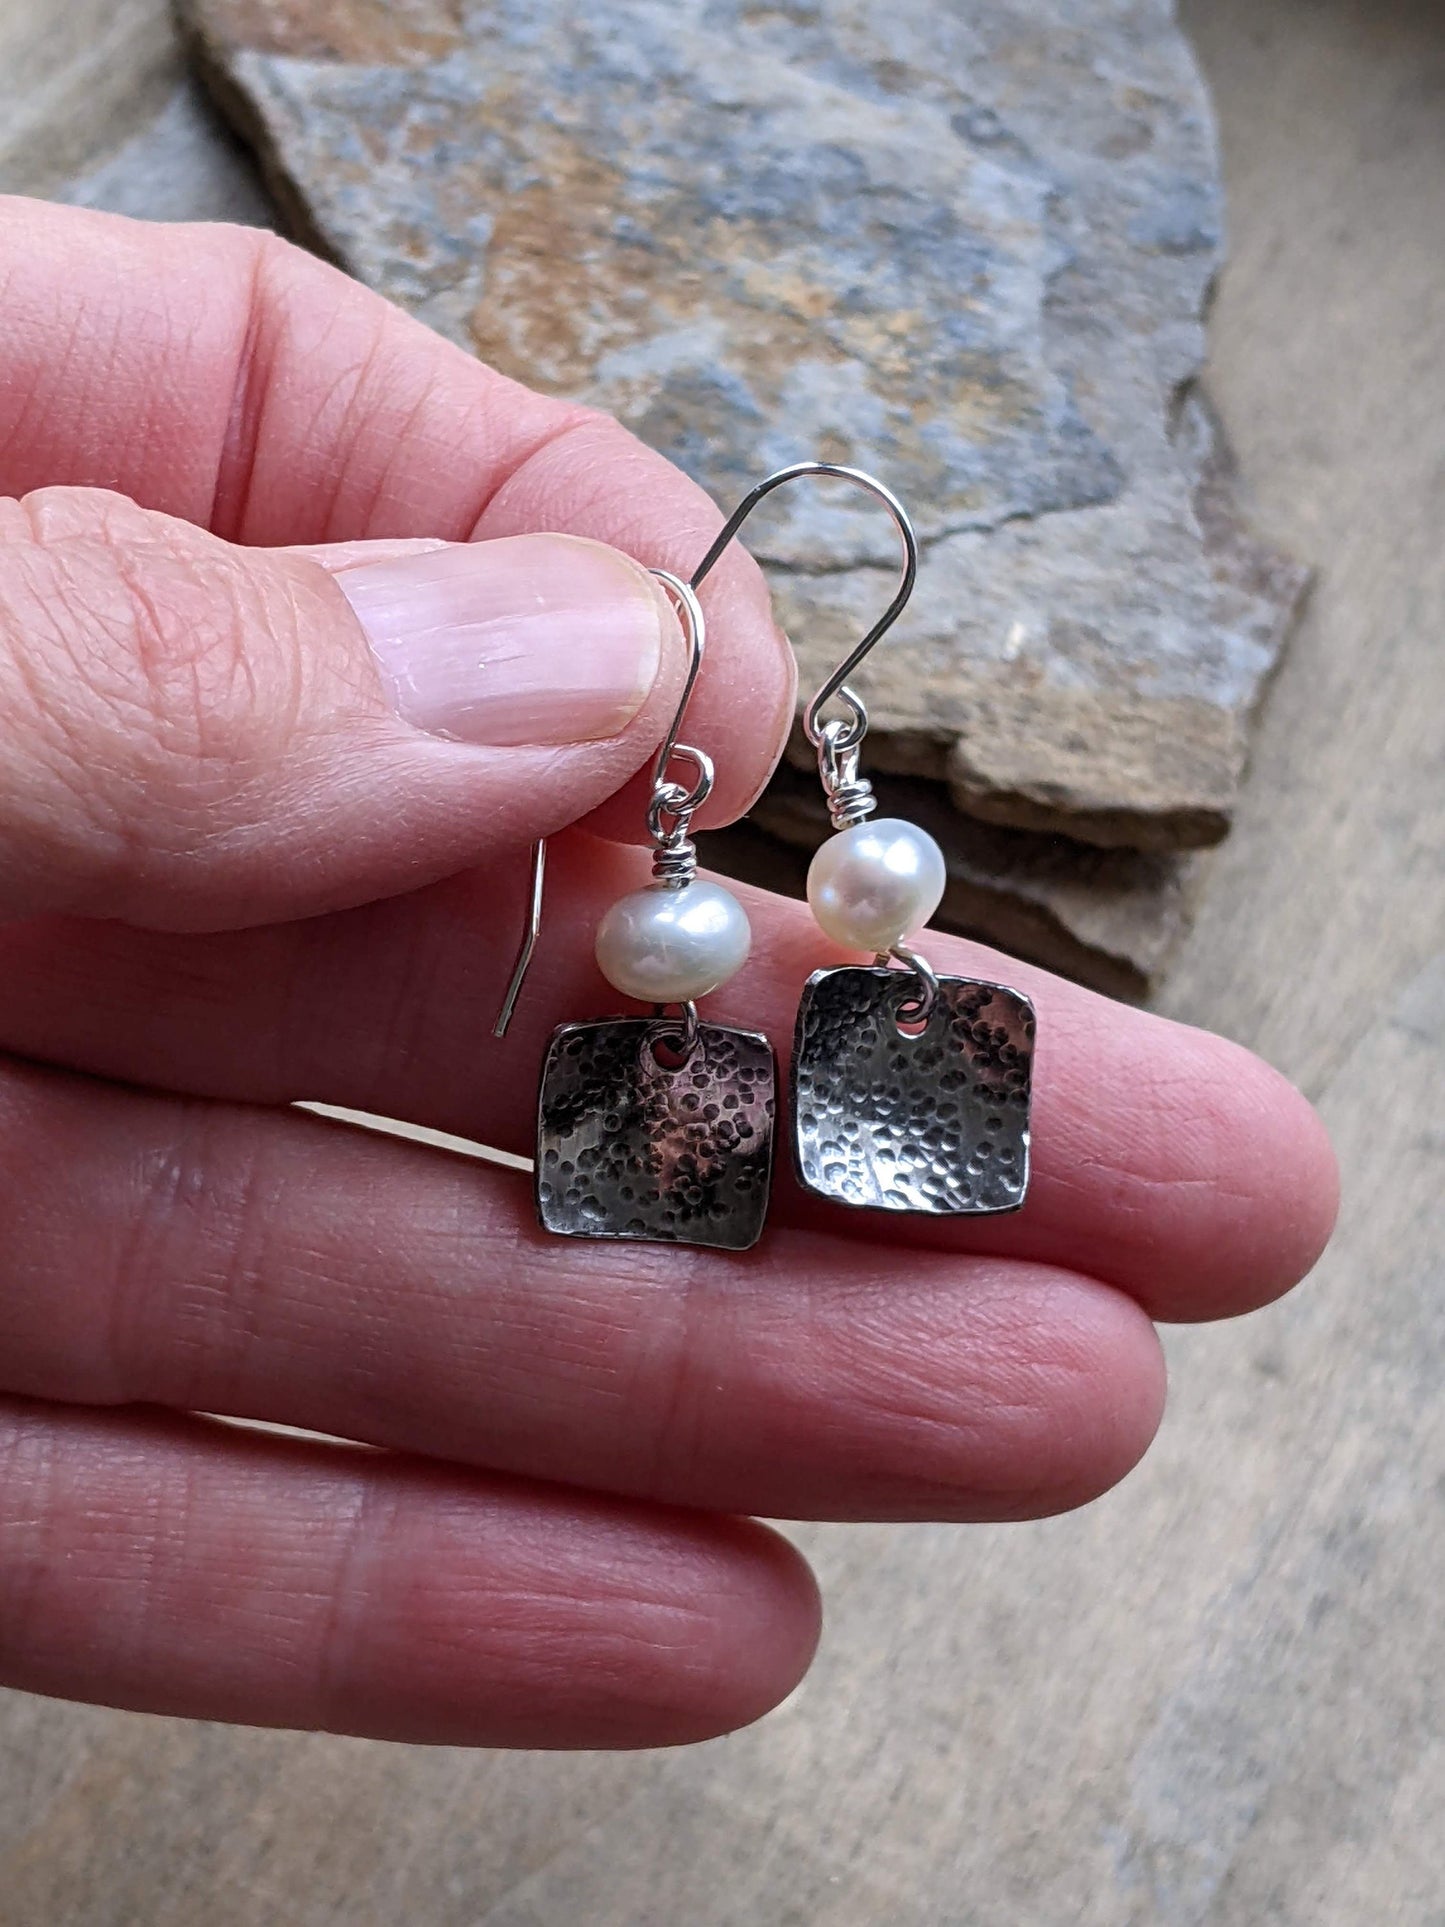 Pearl and Sterling Silver Earrings